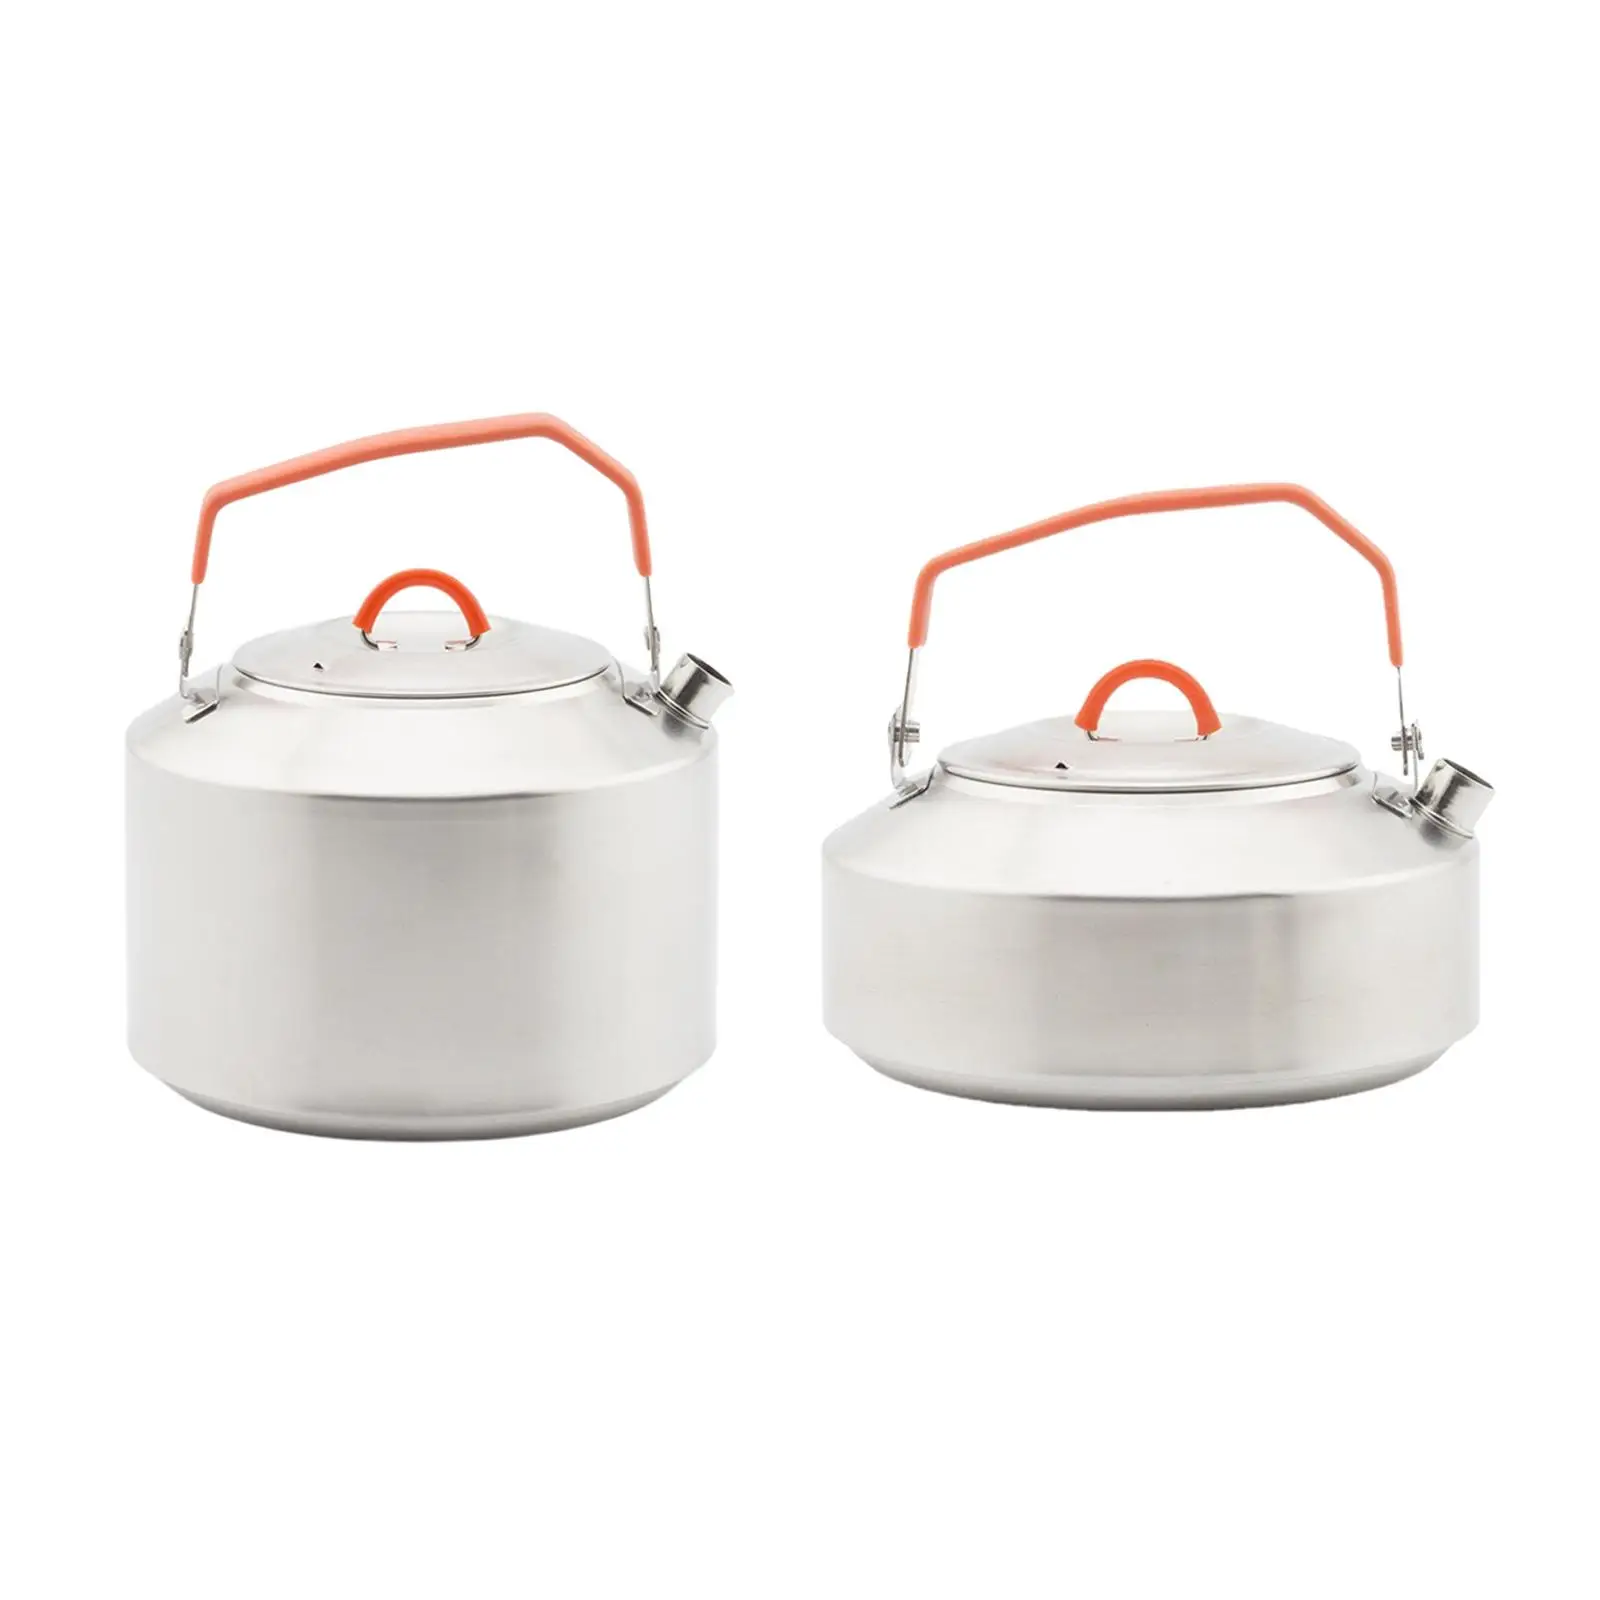 Lightweight Camping Tea Kettle Camping Tea Pot with Lid Campfire Kettle Water